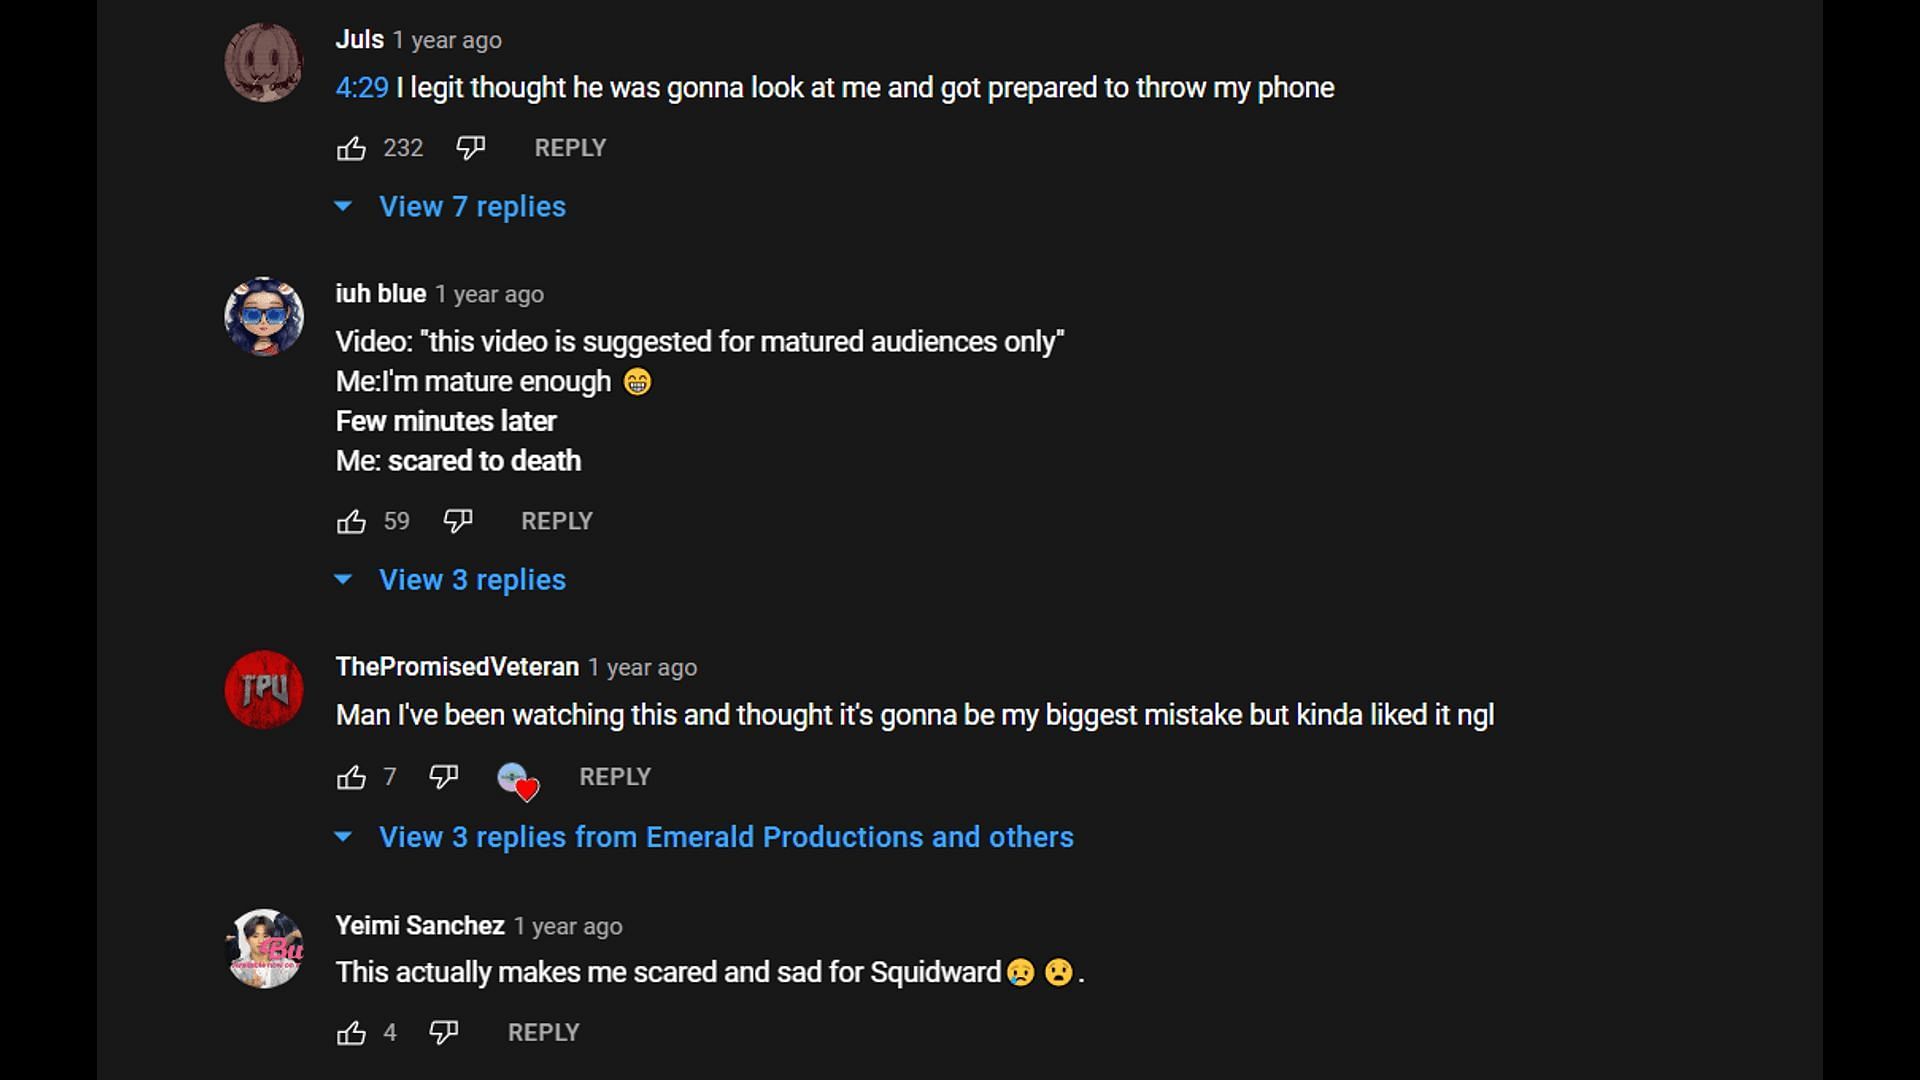 Comments by viewers who watched the video(1/3) (Image via Emerald Productions/YouTube)